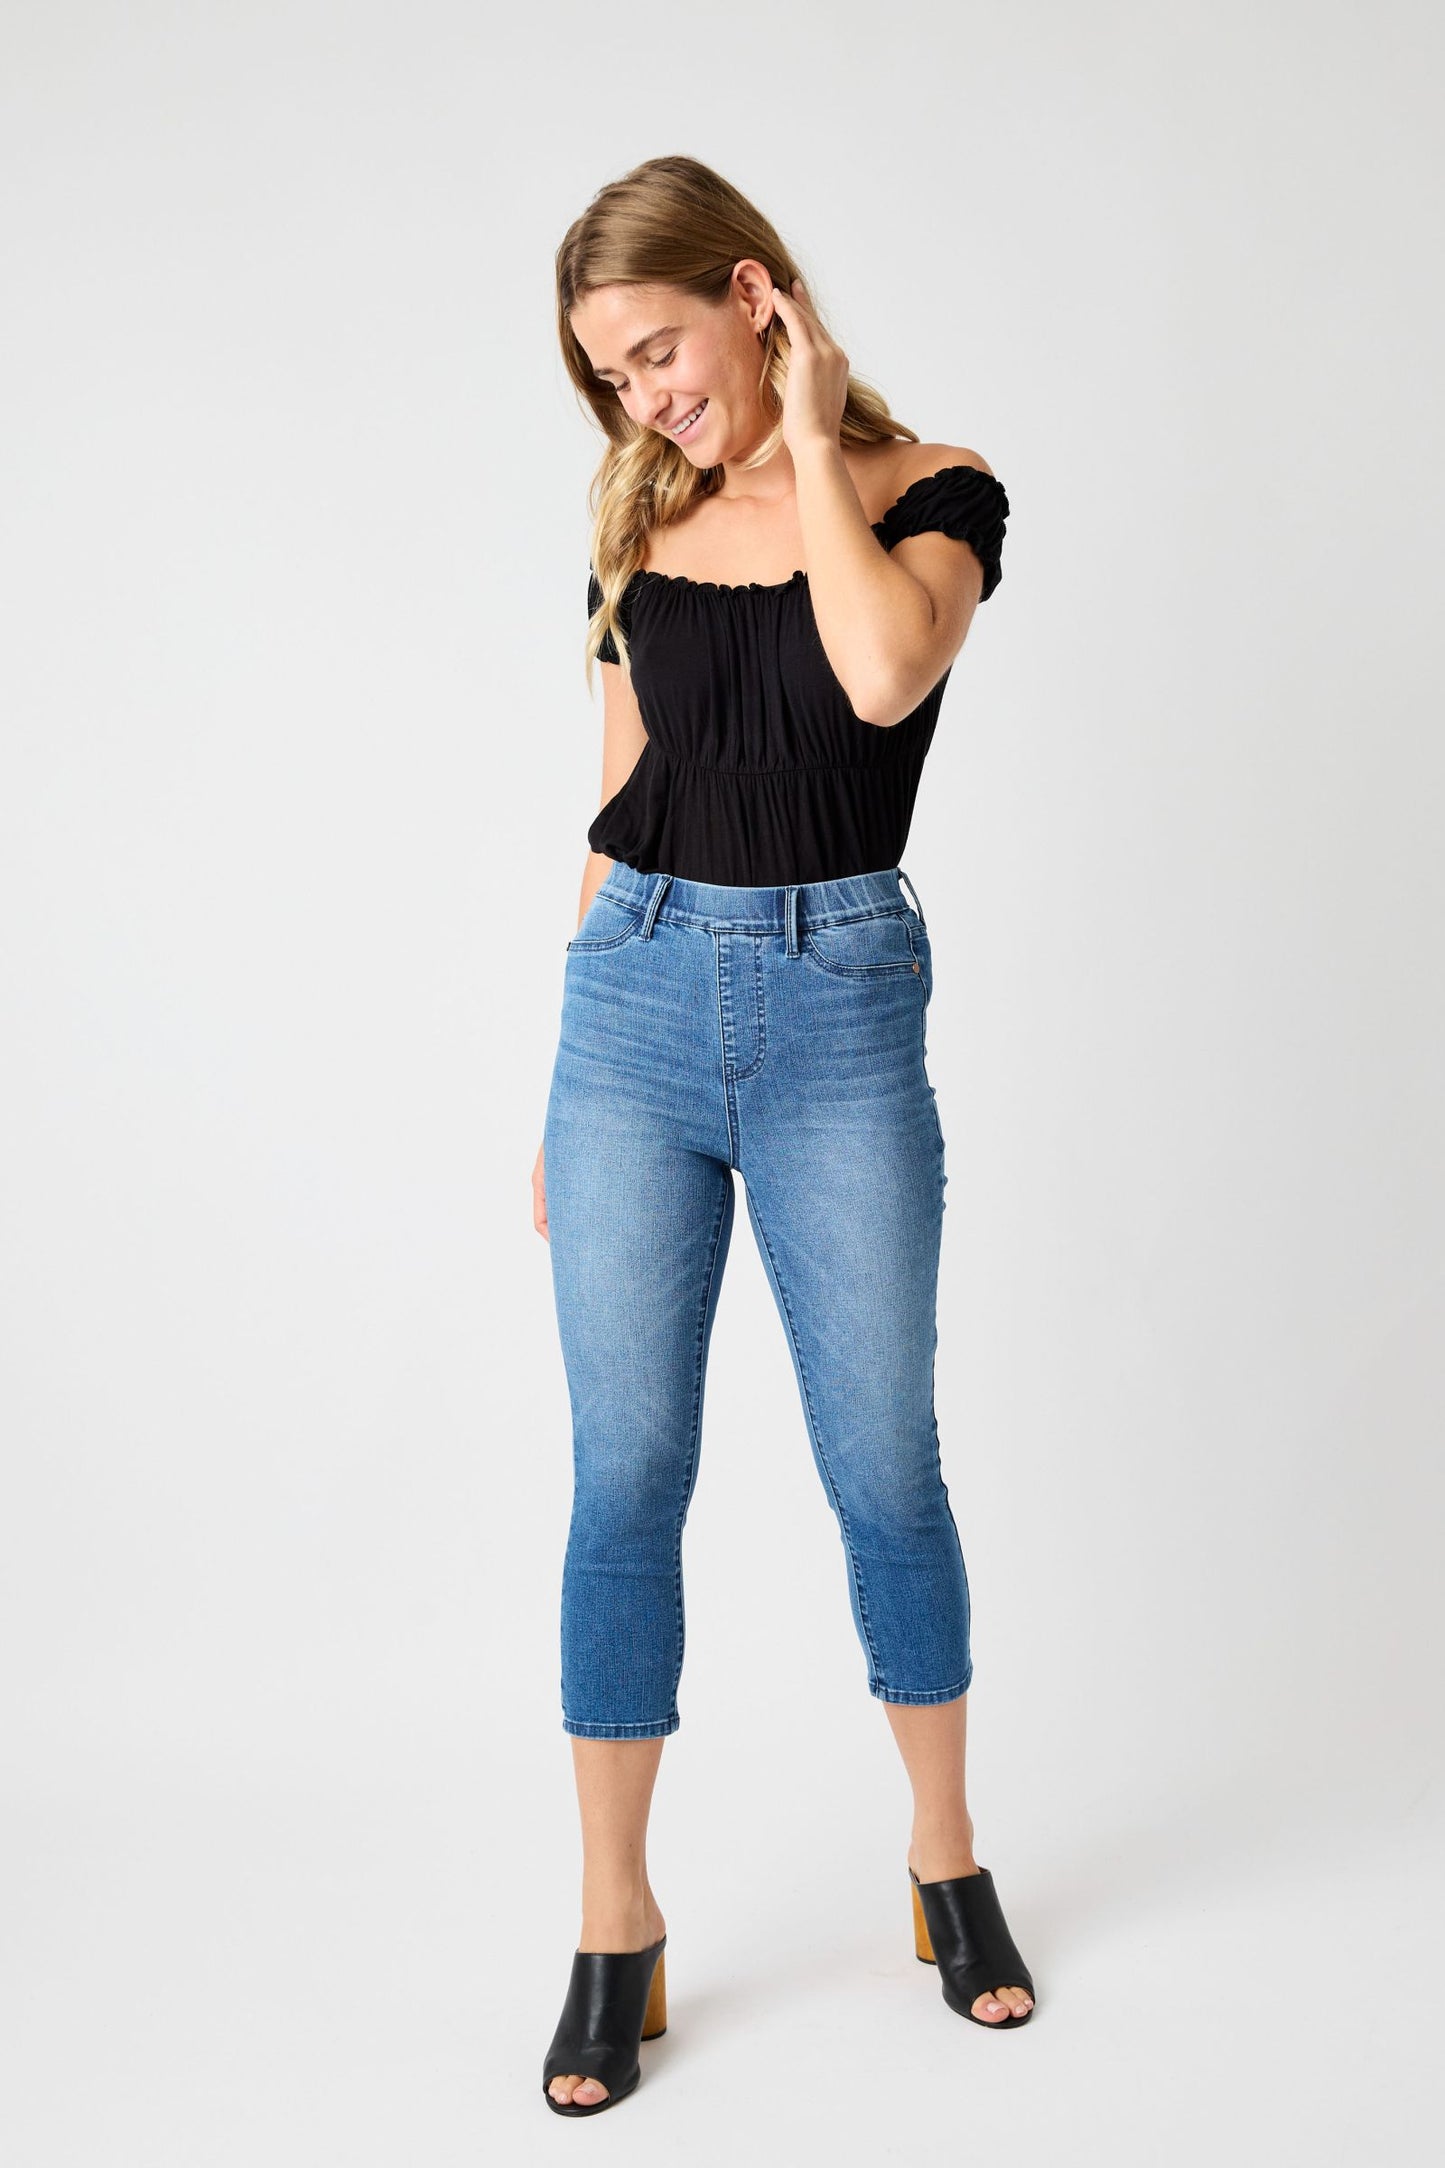 Pull on Capri Jeans-Apparel > Apparel & Accessories > Clothing > Pants-Quinn's Mercantile